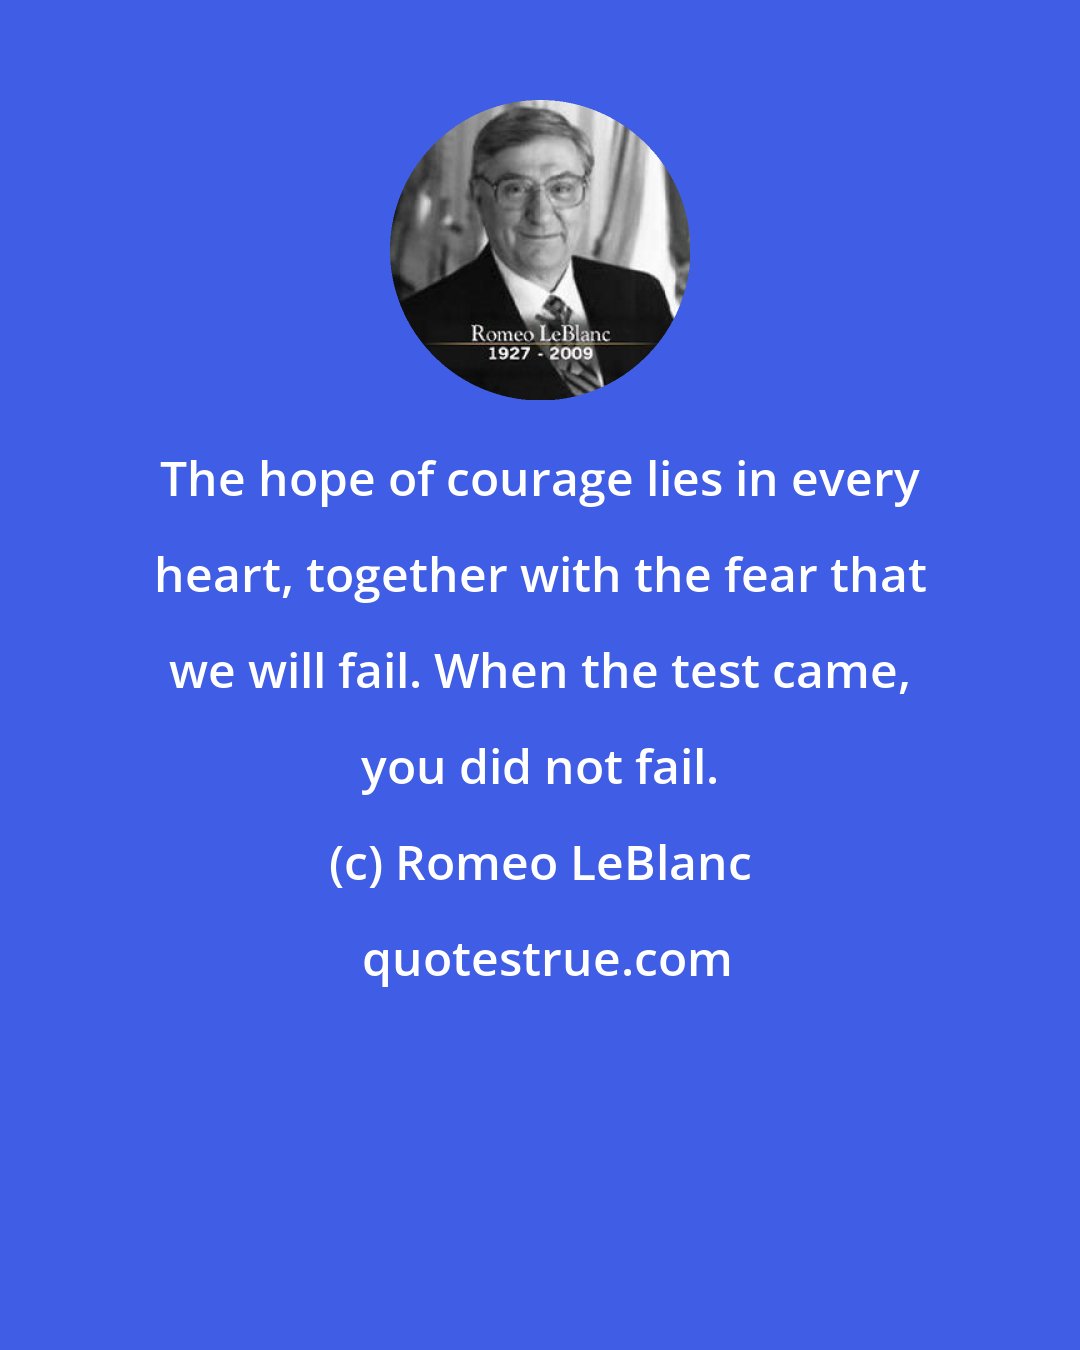 Romeo LeBlanc: The hope of courage lies in every heart, together with the fear that we will fail. When the test came, you did not fail.